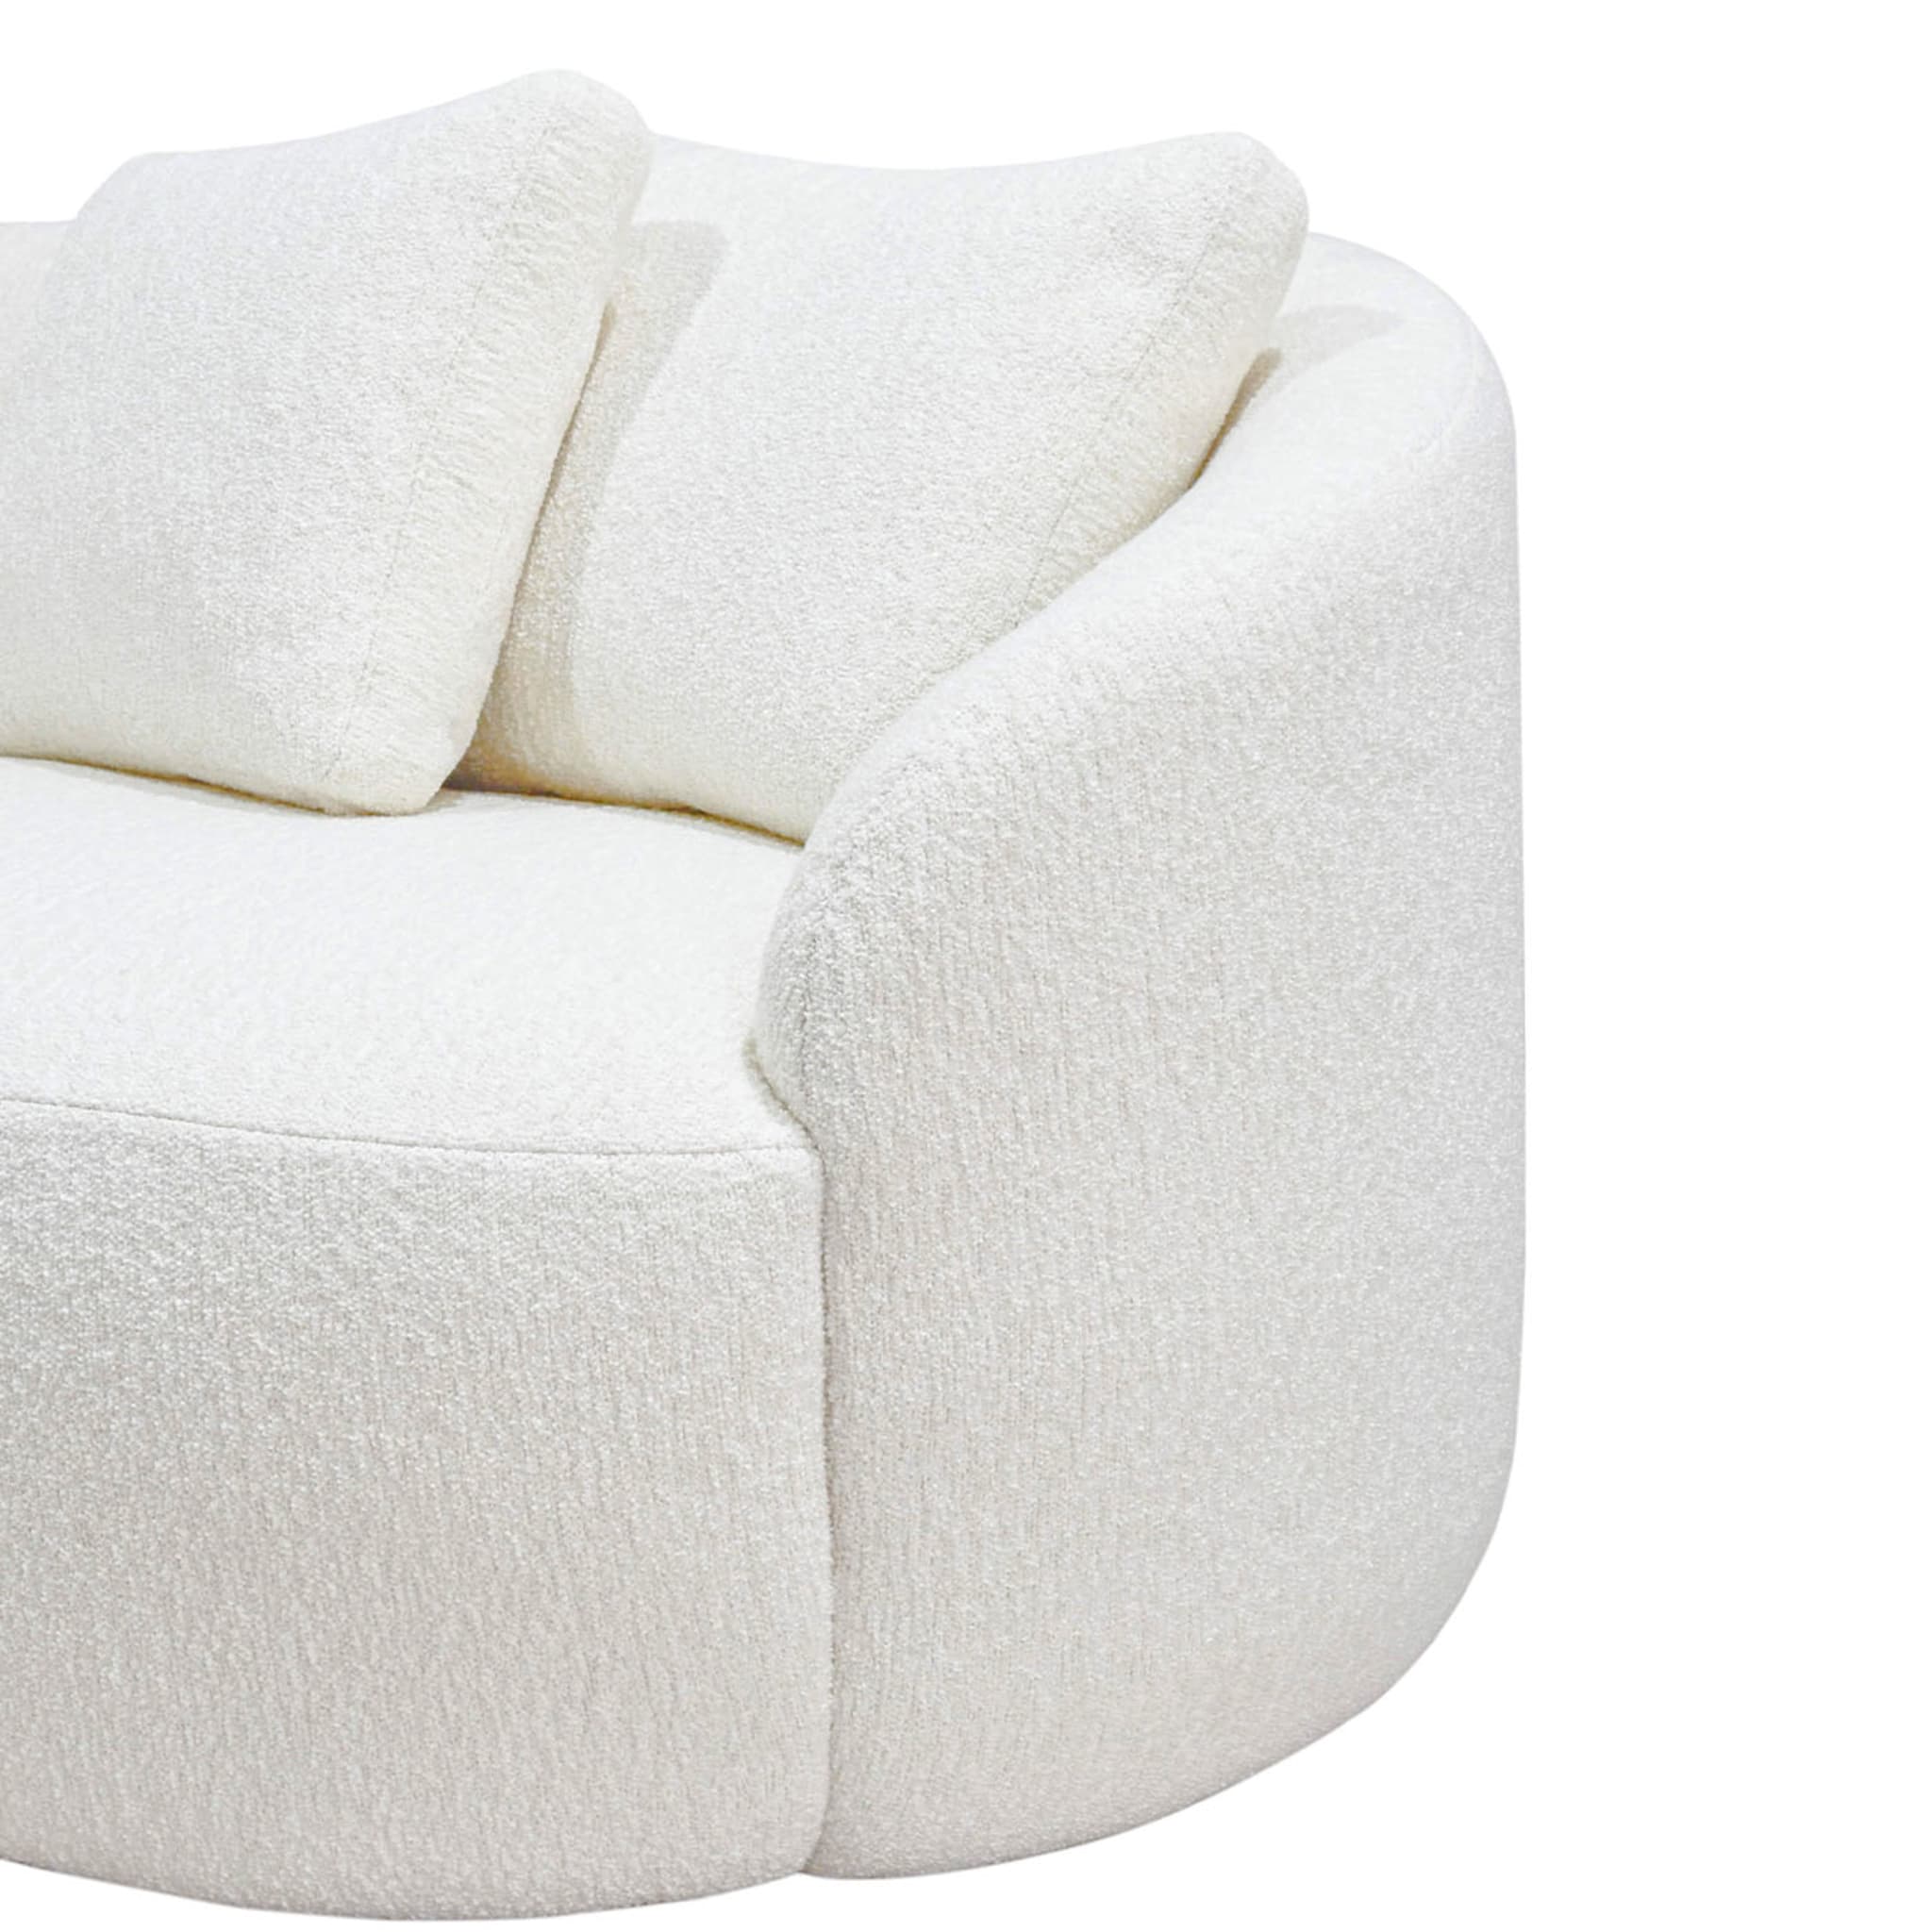 Cottonflower' Sofa 240 in White Boucle Fabric - Alternative view 2